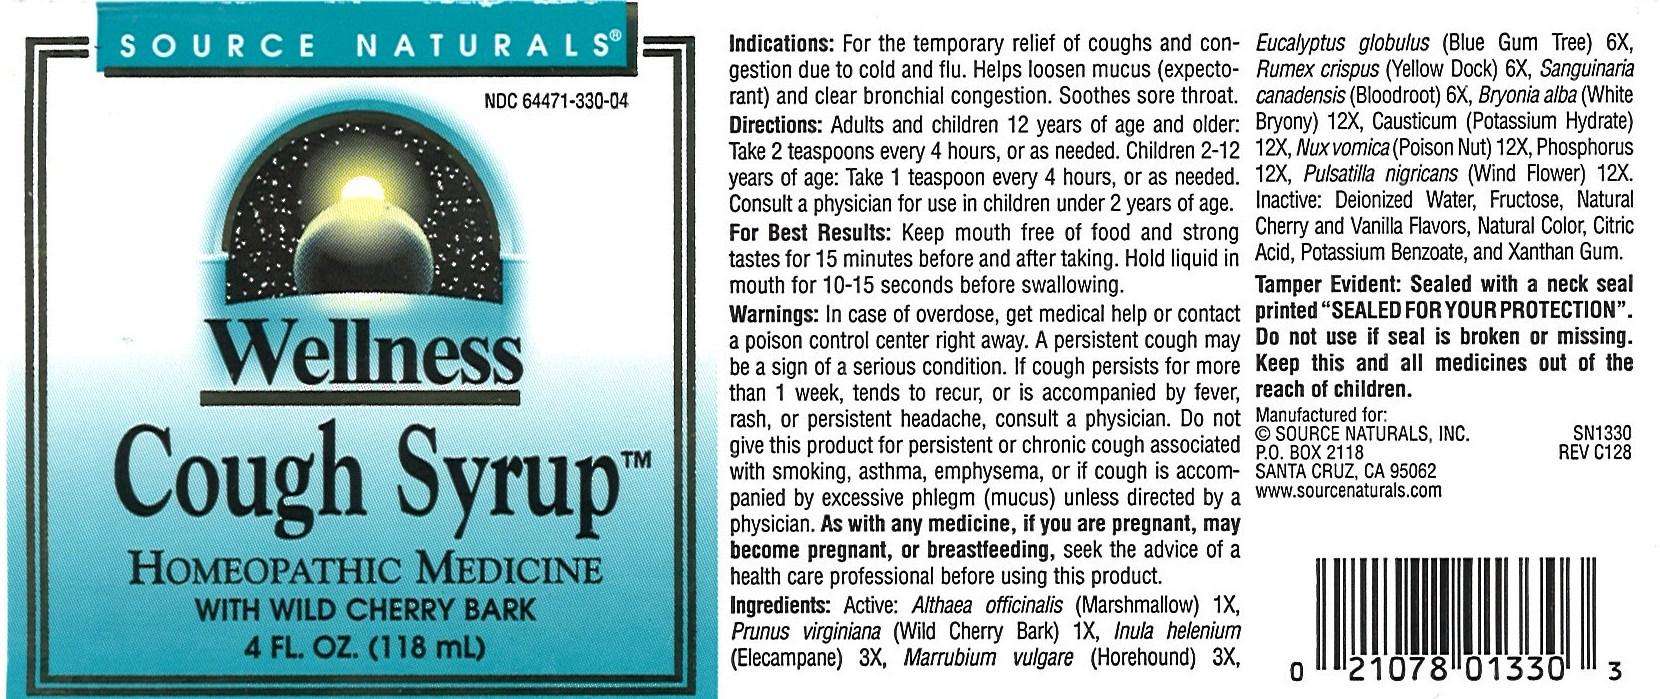 Wellness4Cough Syrup